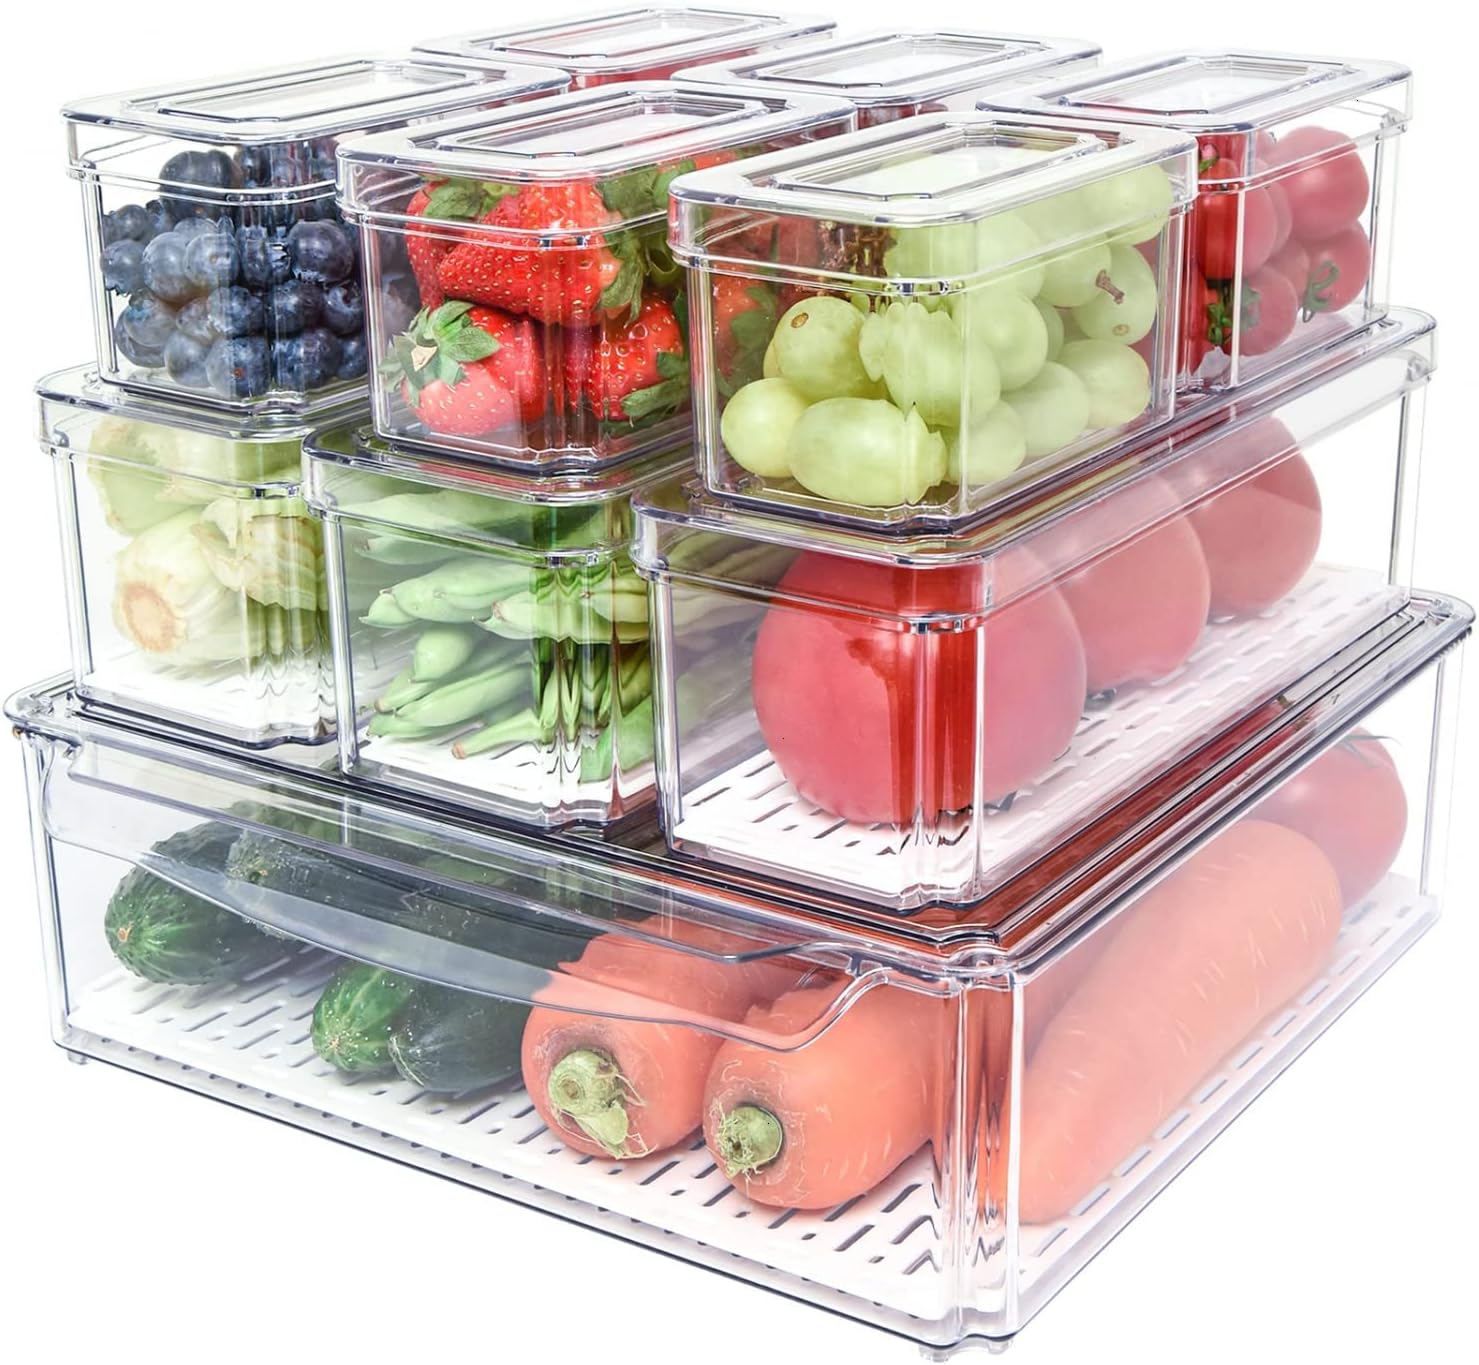 Pomeat 10 Pack Fridge Organizer, Stackable Refrigerator Organizer Bins with Lids, BPA-Free Produce Fruit Storage Containers for Storage Clear for Food, Drinks, Vegetable Storage